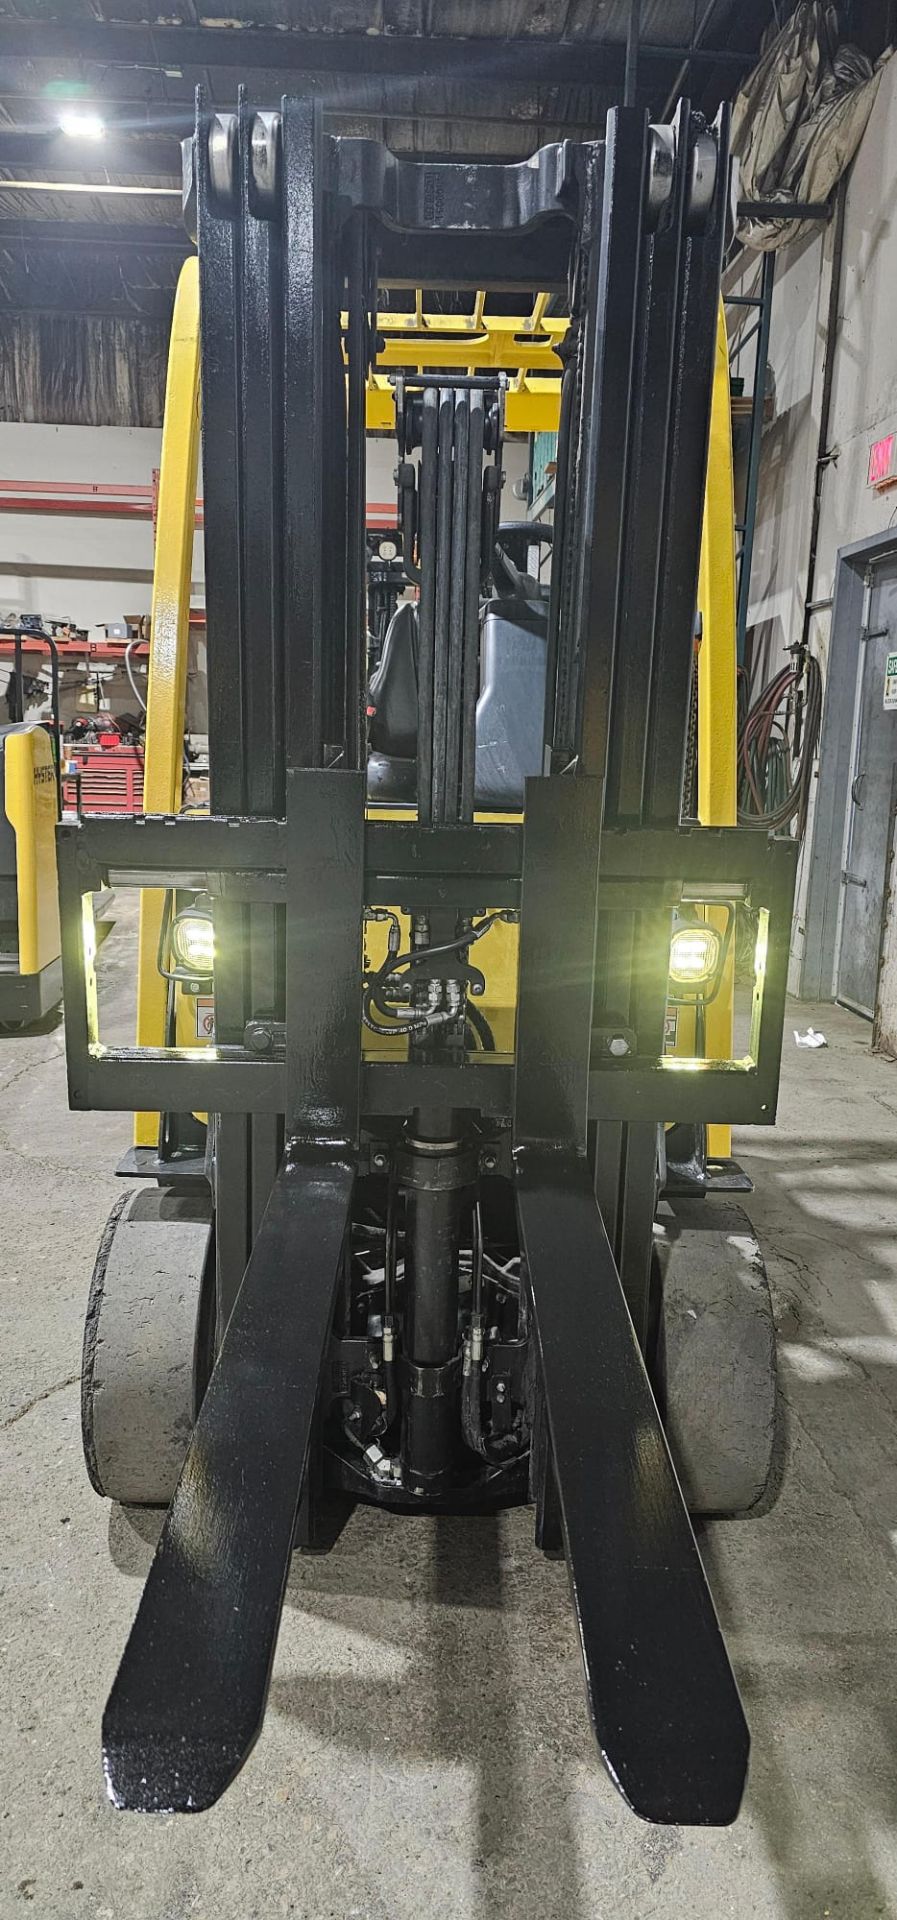 2017 Hyster 4,500lbs Capacity Forklift Electric 48V with sideshift & 3-STAGE MAST 187" load height - Image 7 of 7